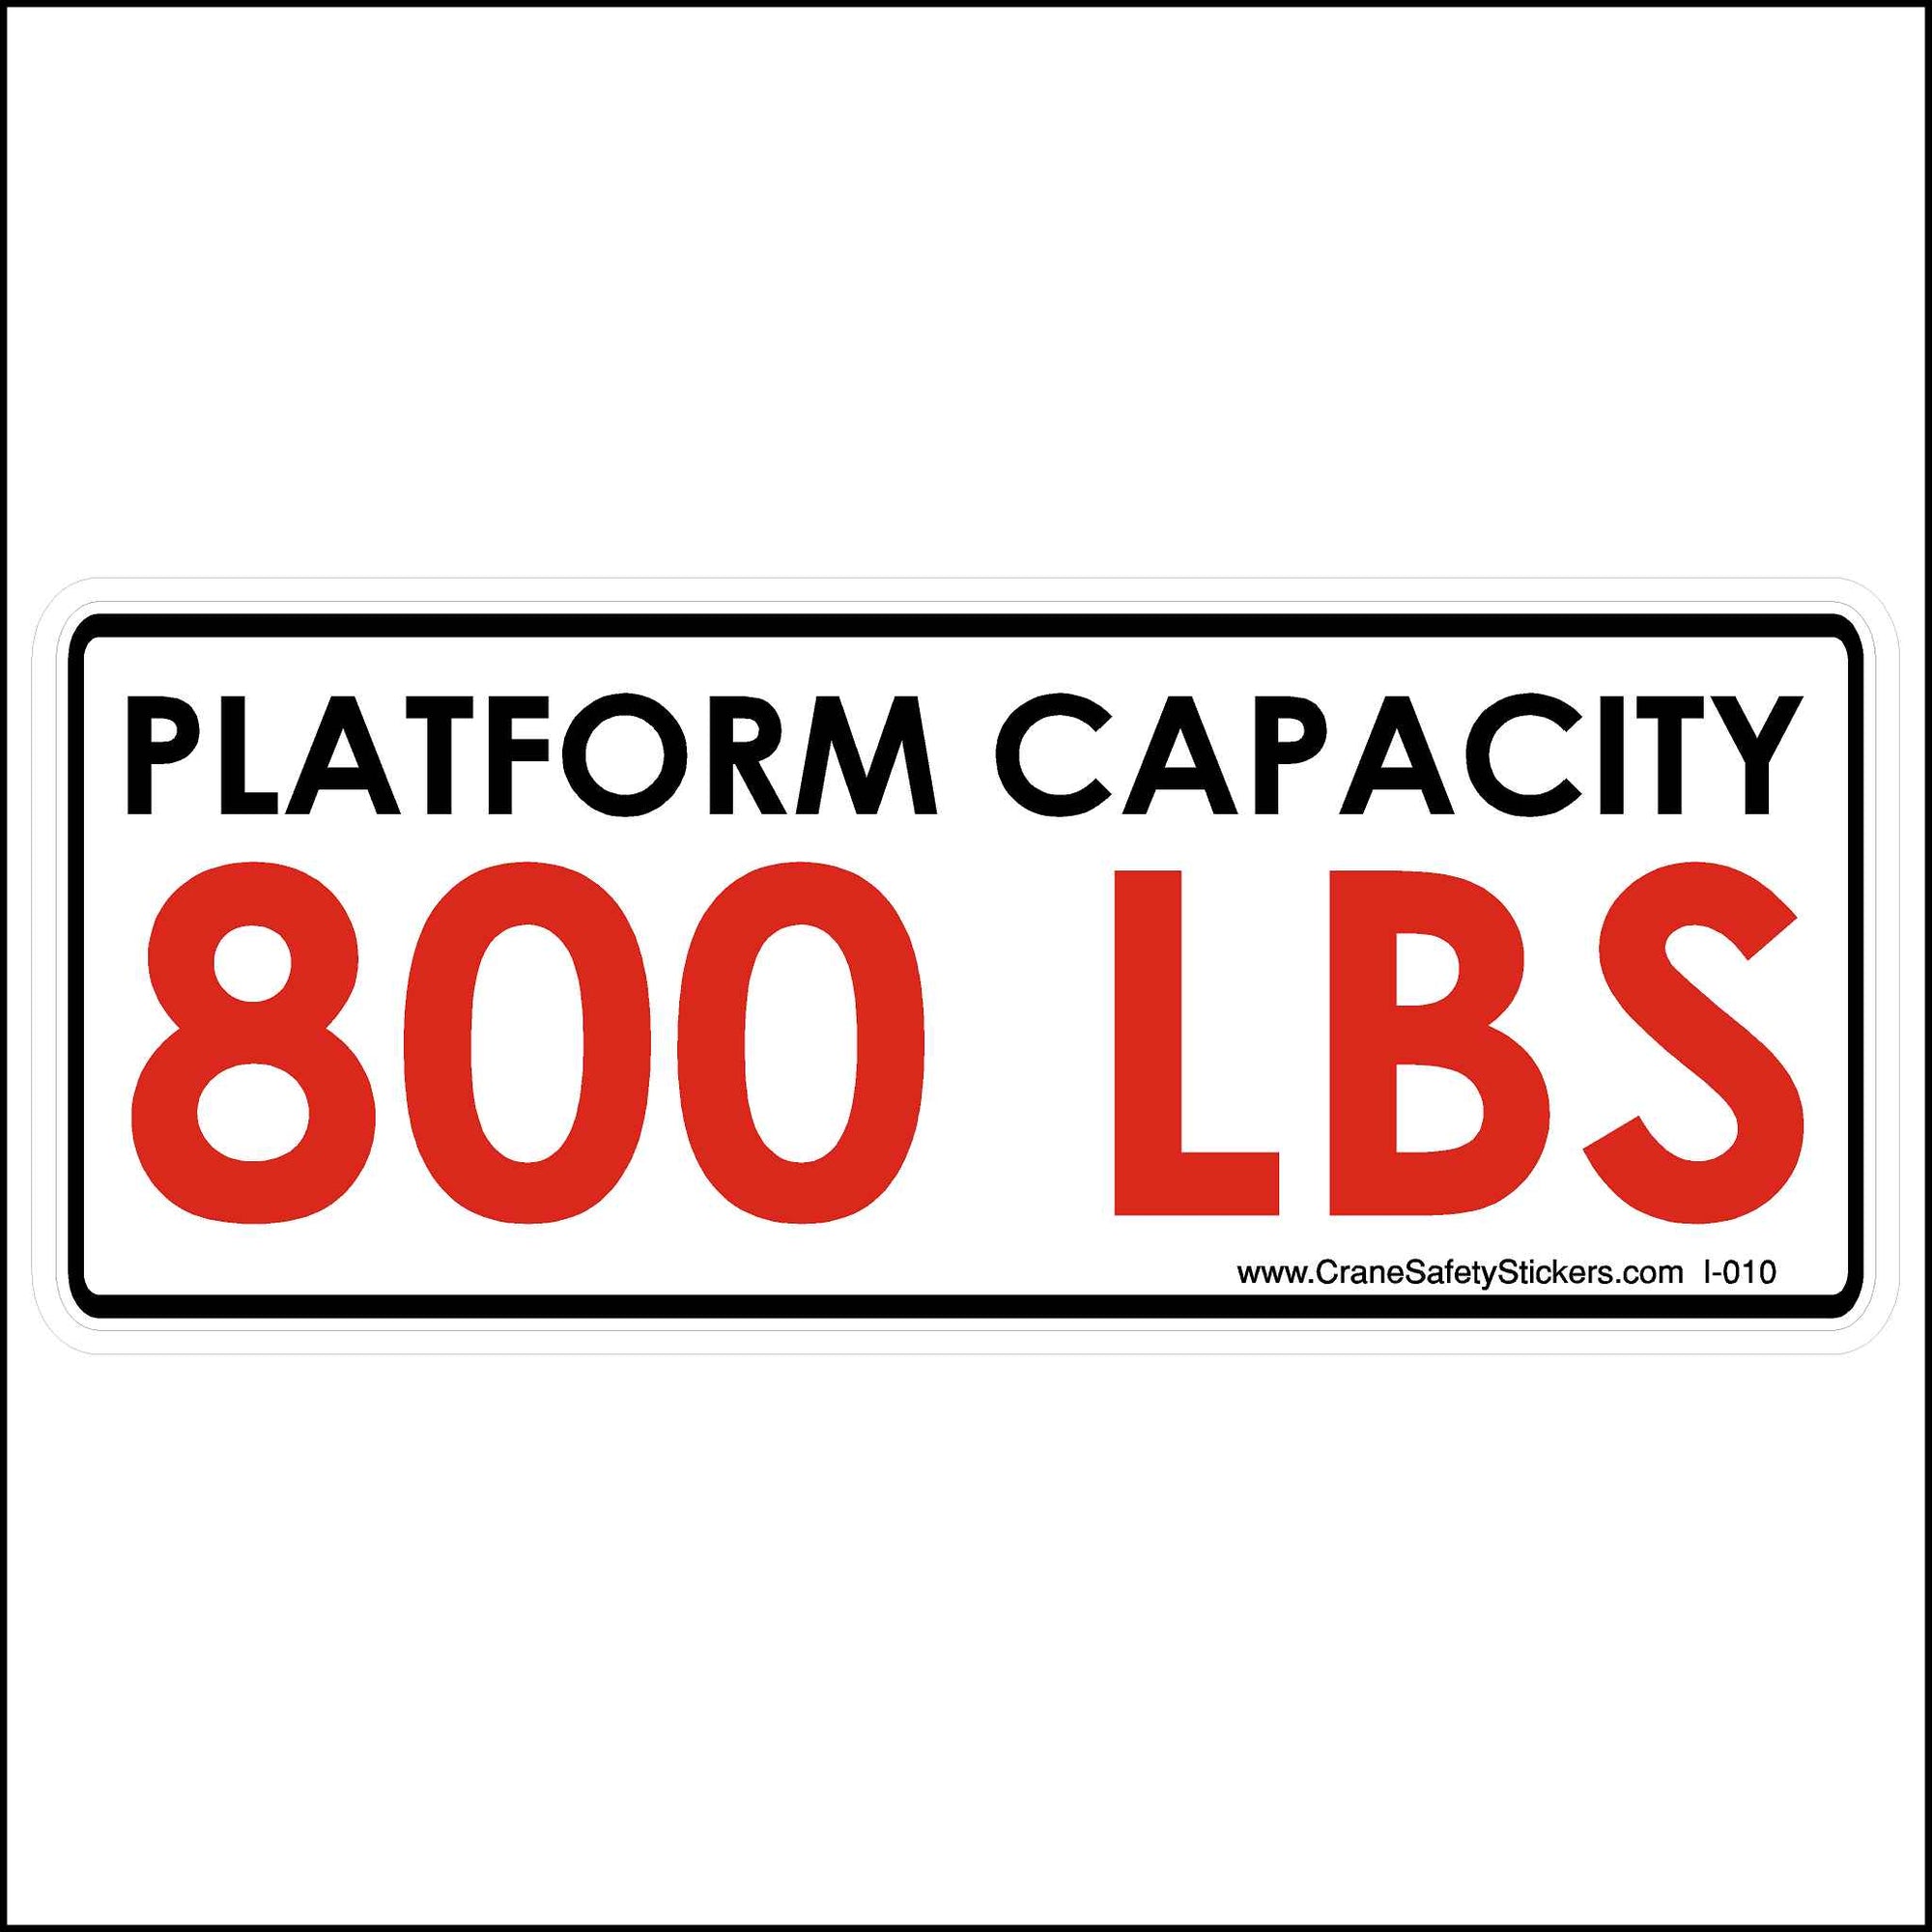 Platform Capacity Sticker Printed With, Platform Capacity 800 LBS. The Words Platform Capacity are in black and 800 LBS are in red. Both  on a white background.